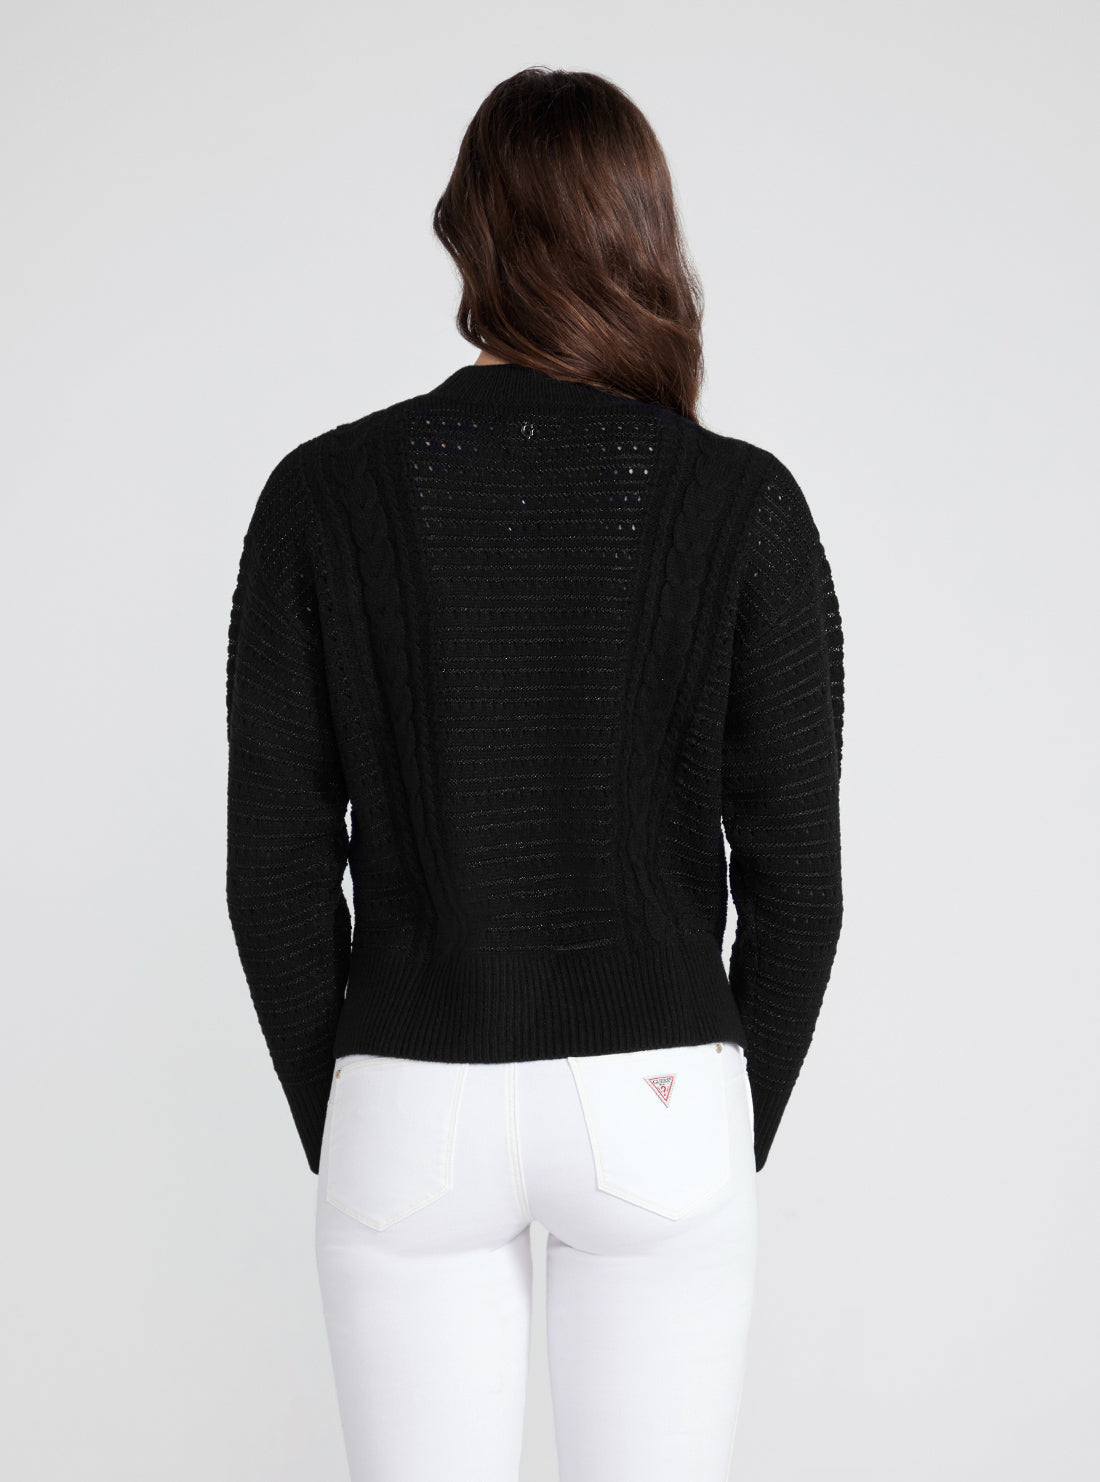 GUESS Black Long Sleeve Edwige Sweater back view